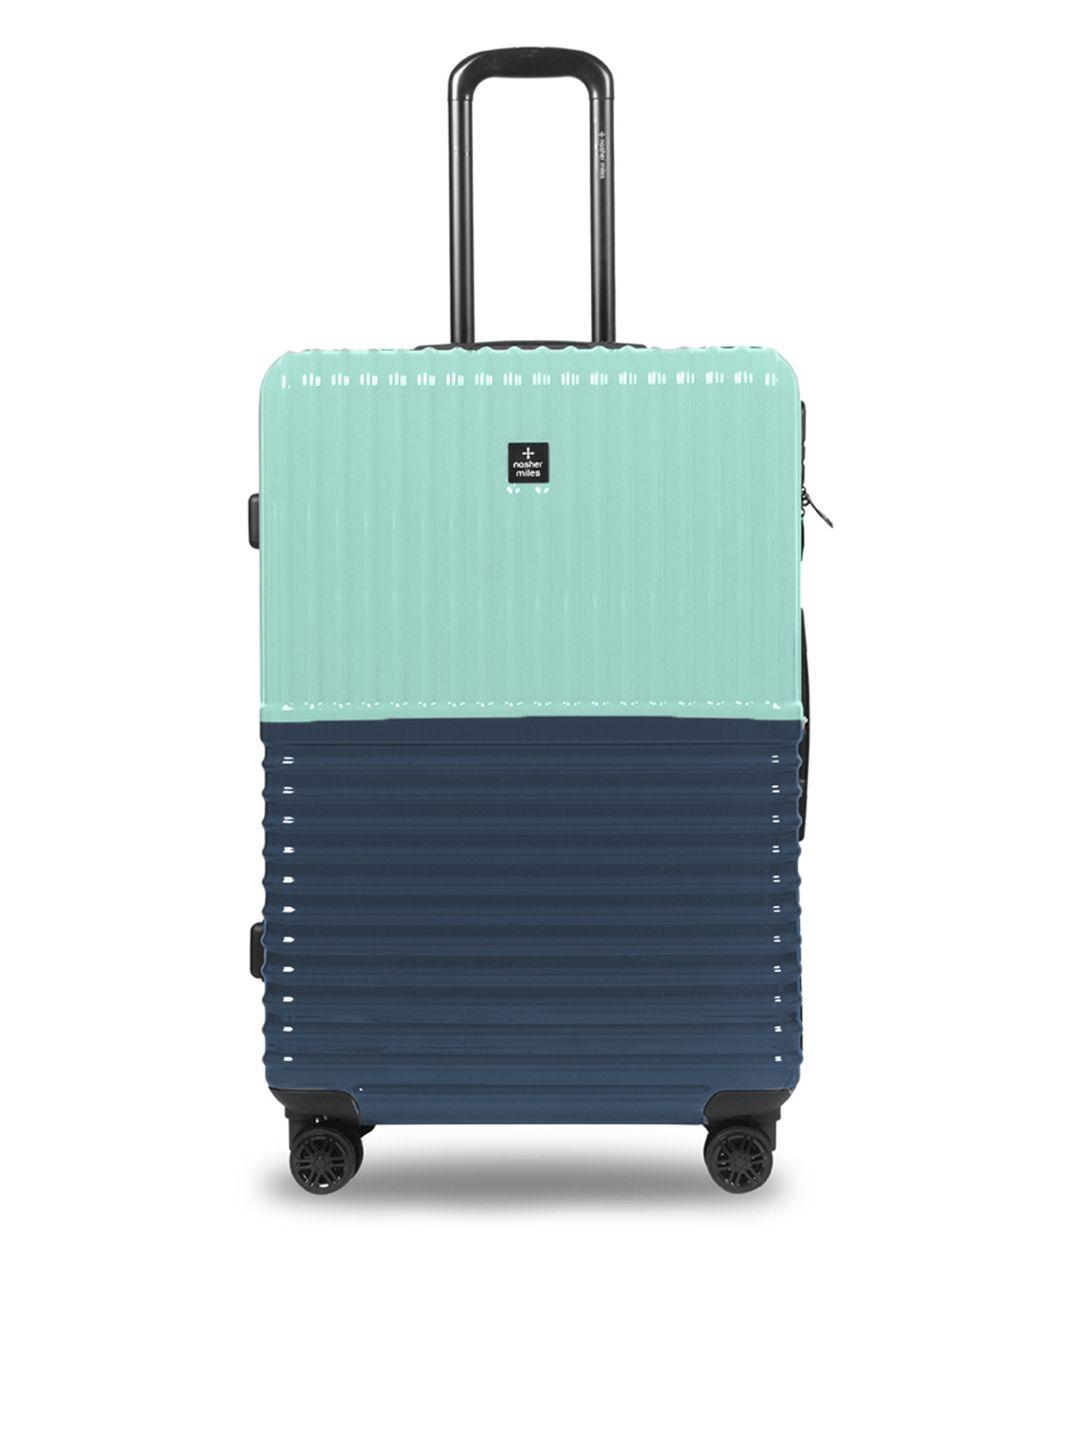 nasher miles istanbul dual color istanbul hard-sided large trolley suitcase